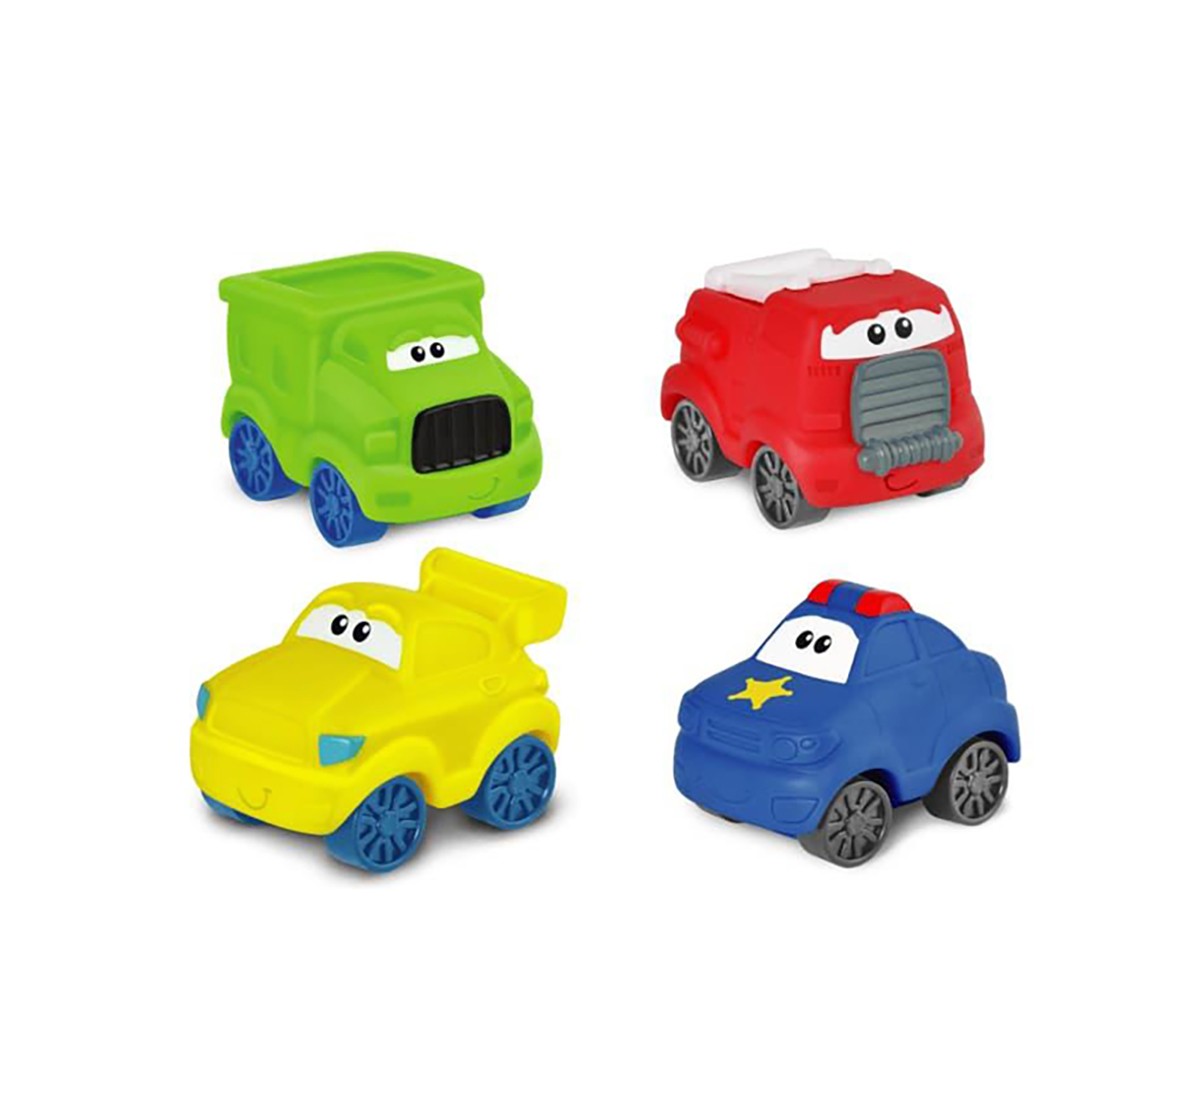 Winfun Fun Pals Car Set  Learning Toys for Kids age 6M+ 